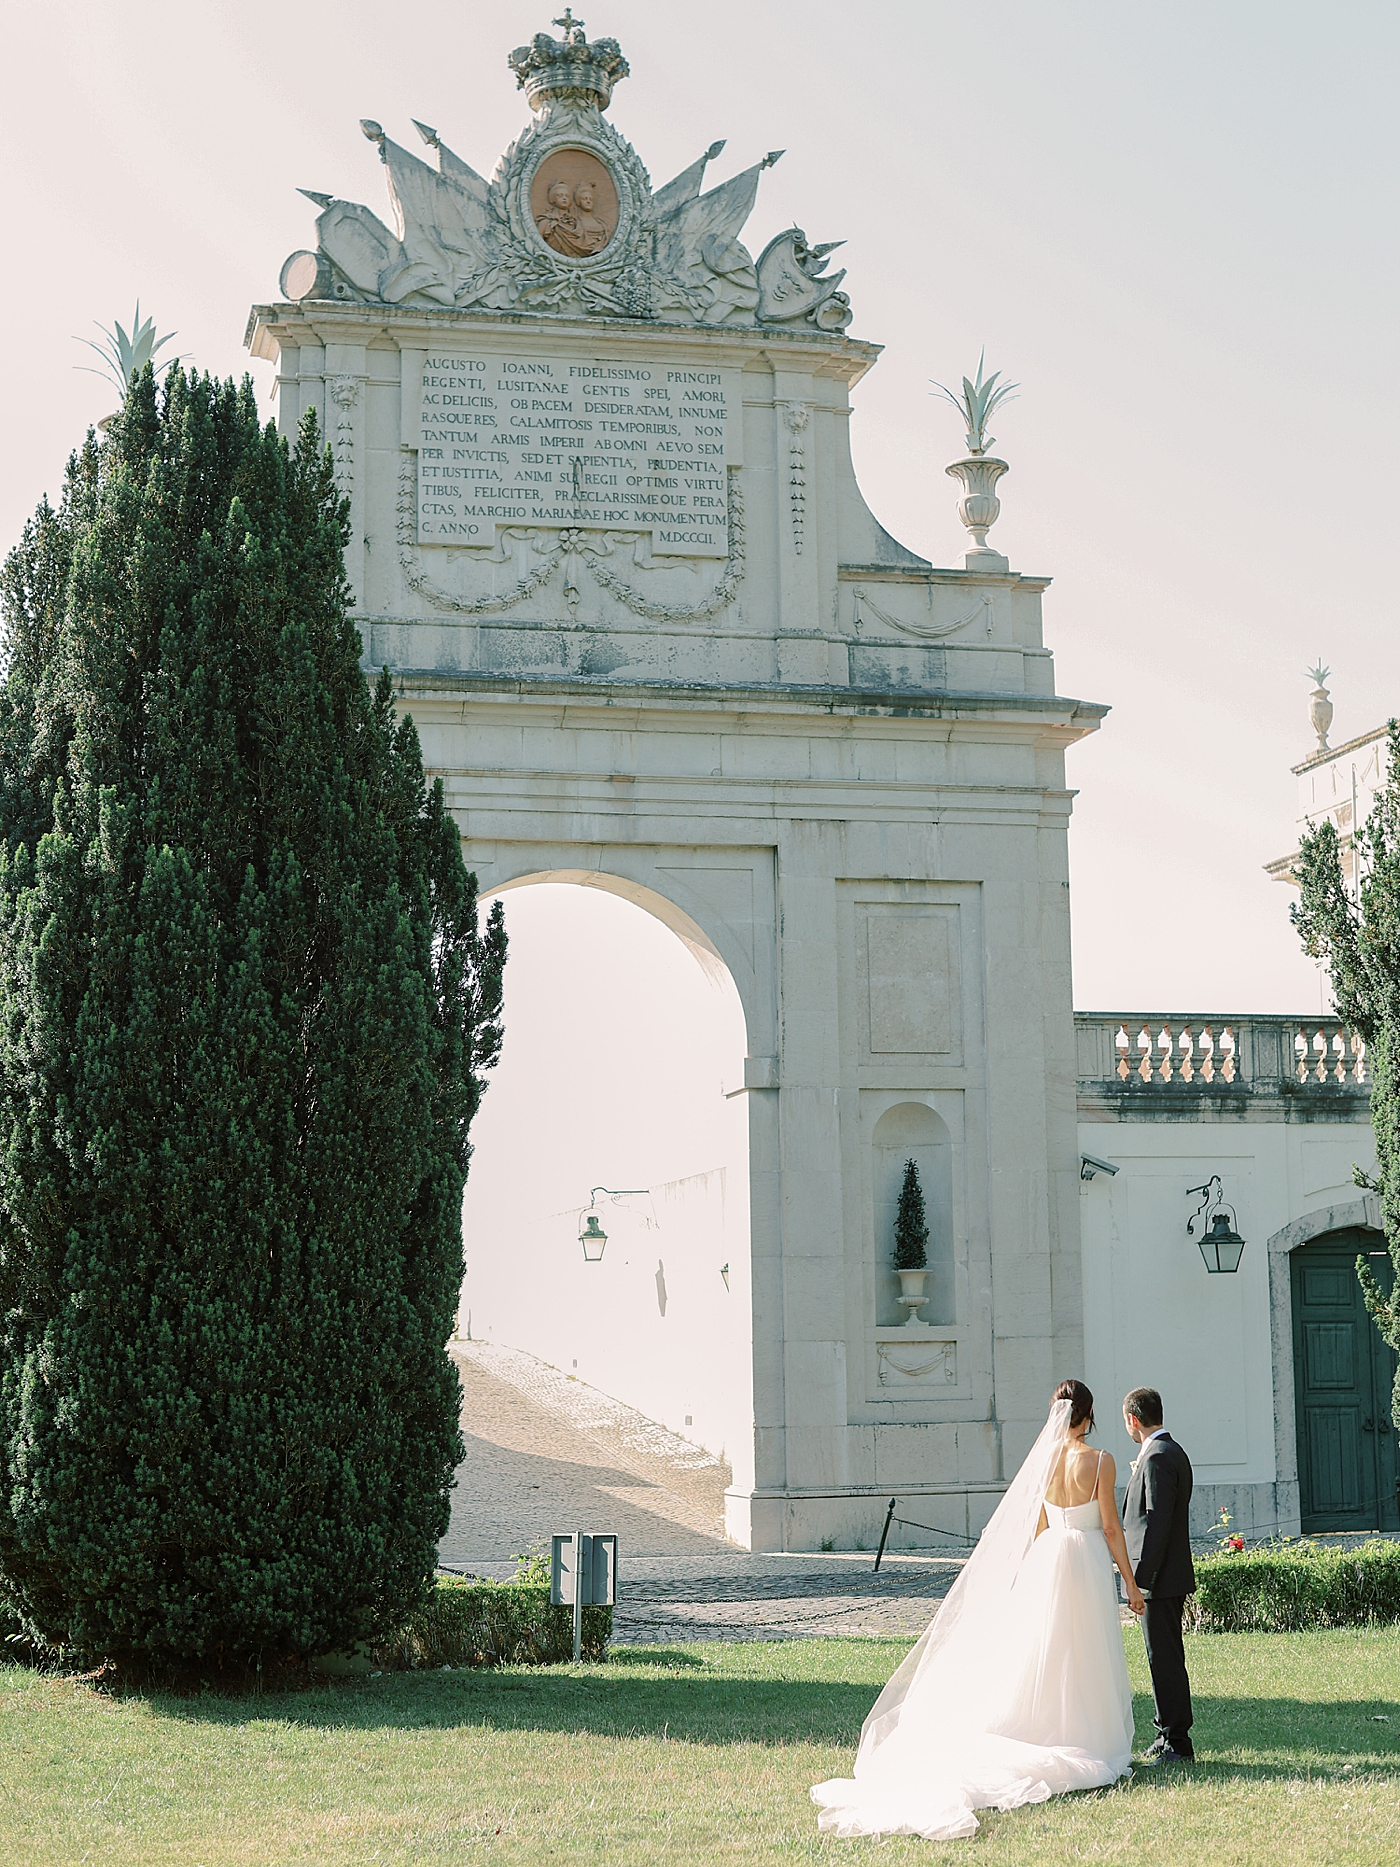 Bride and groom holding hands looking through a monument | Photo by Diane Sotero Photography